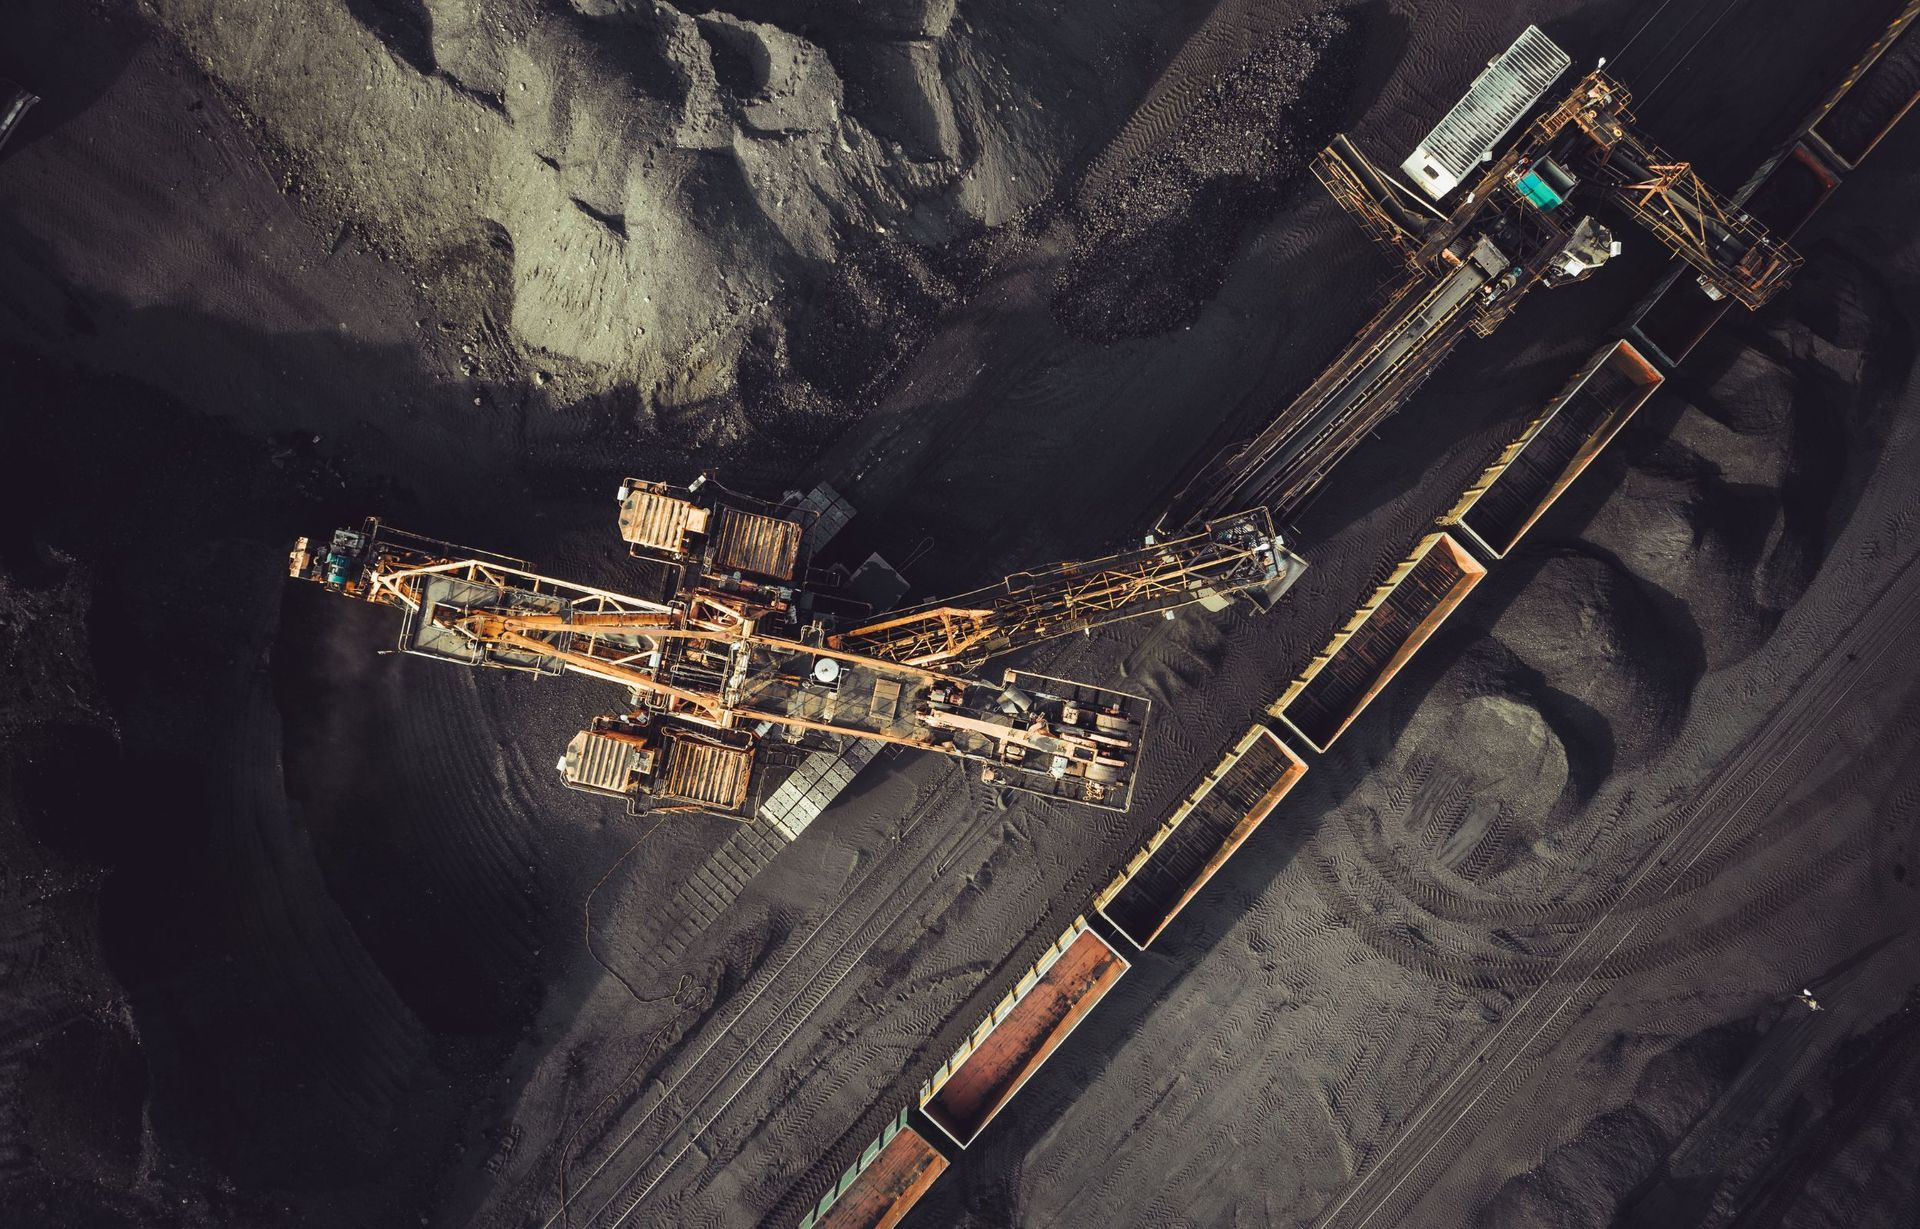 An aerial view of a coal mine with a train going through it.